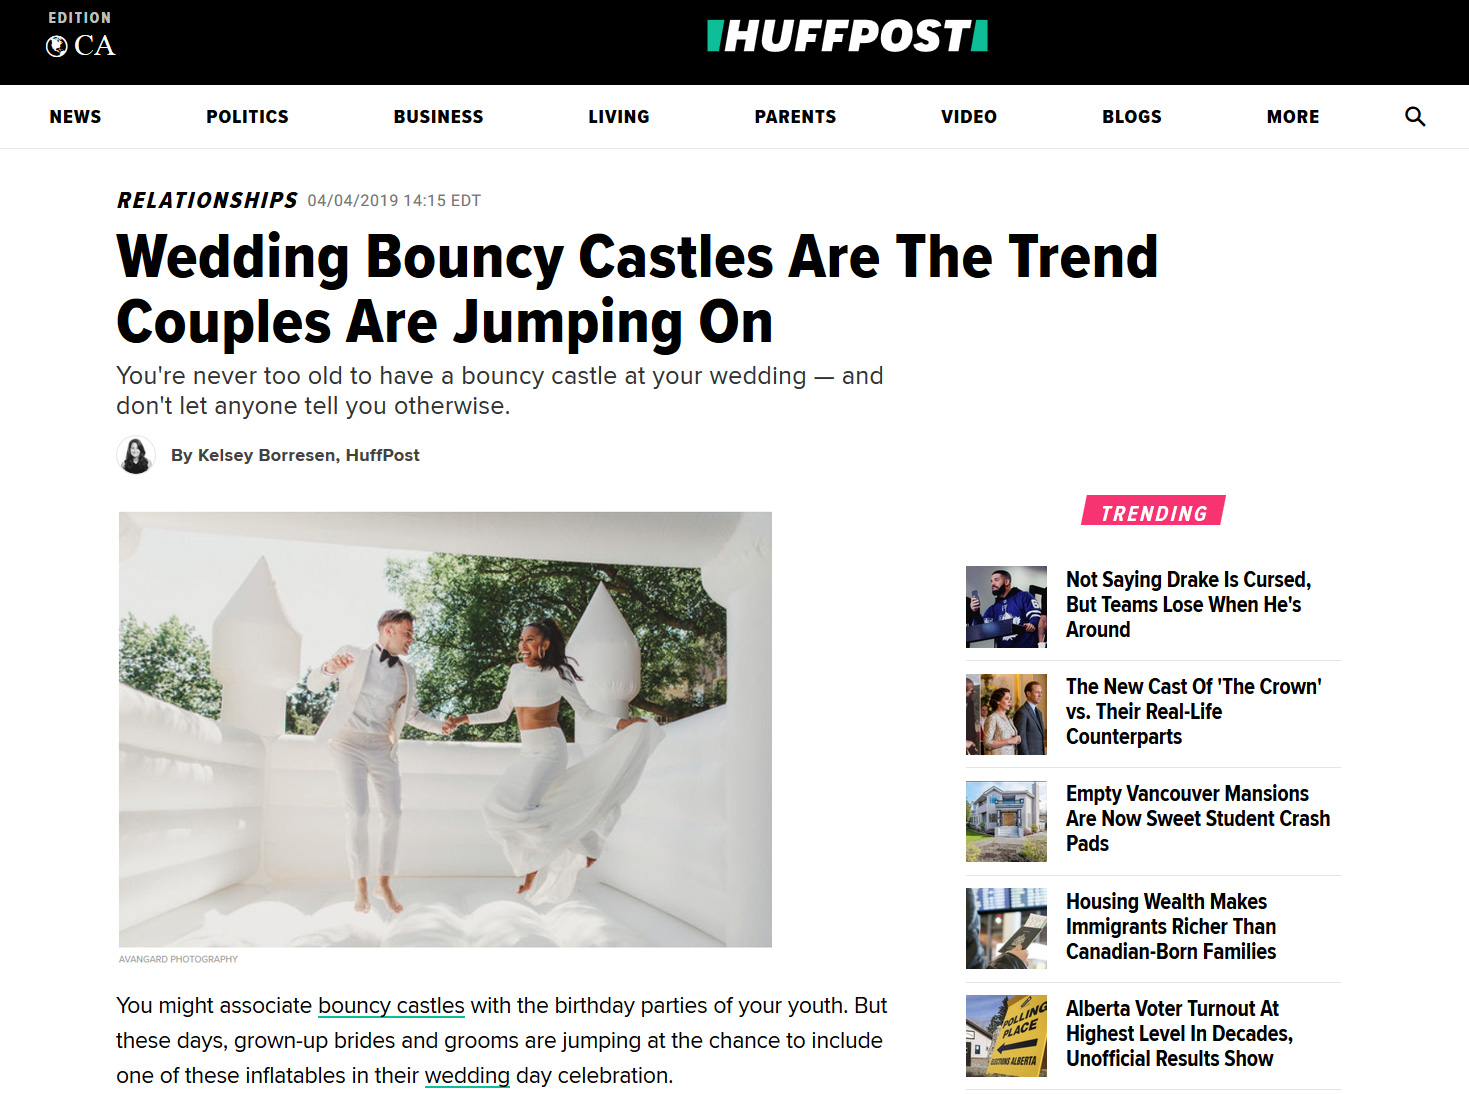 Wedding Bouncy Castles Are The Trend Couples Are Jumping On